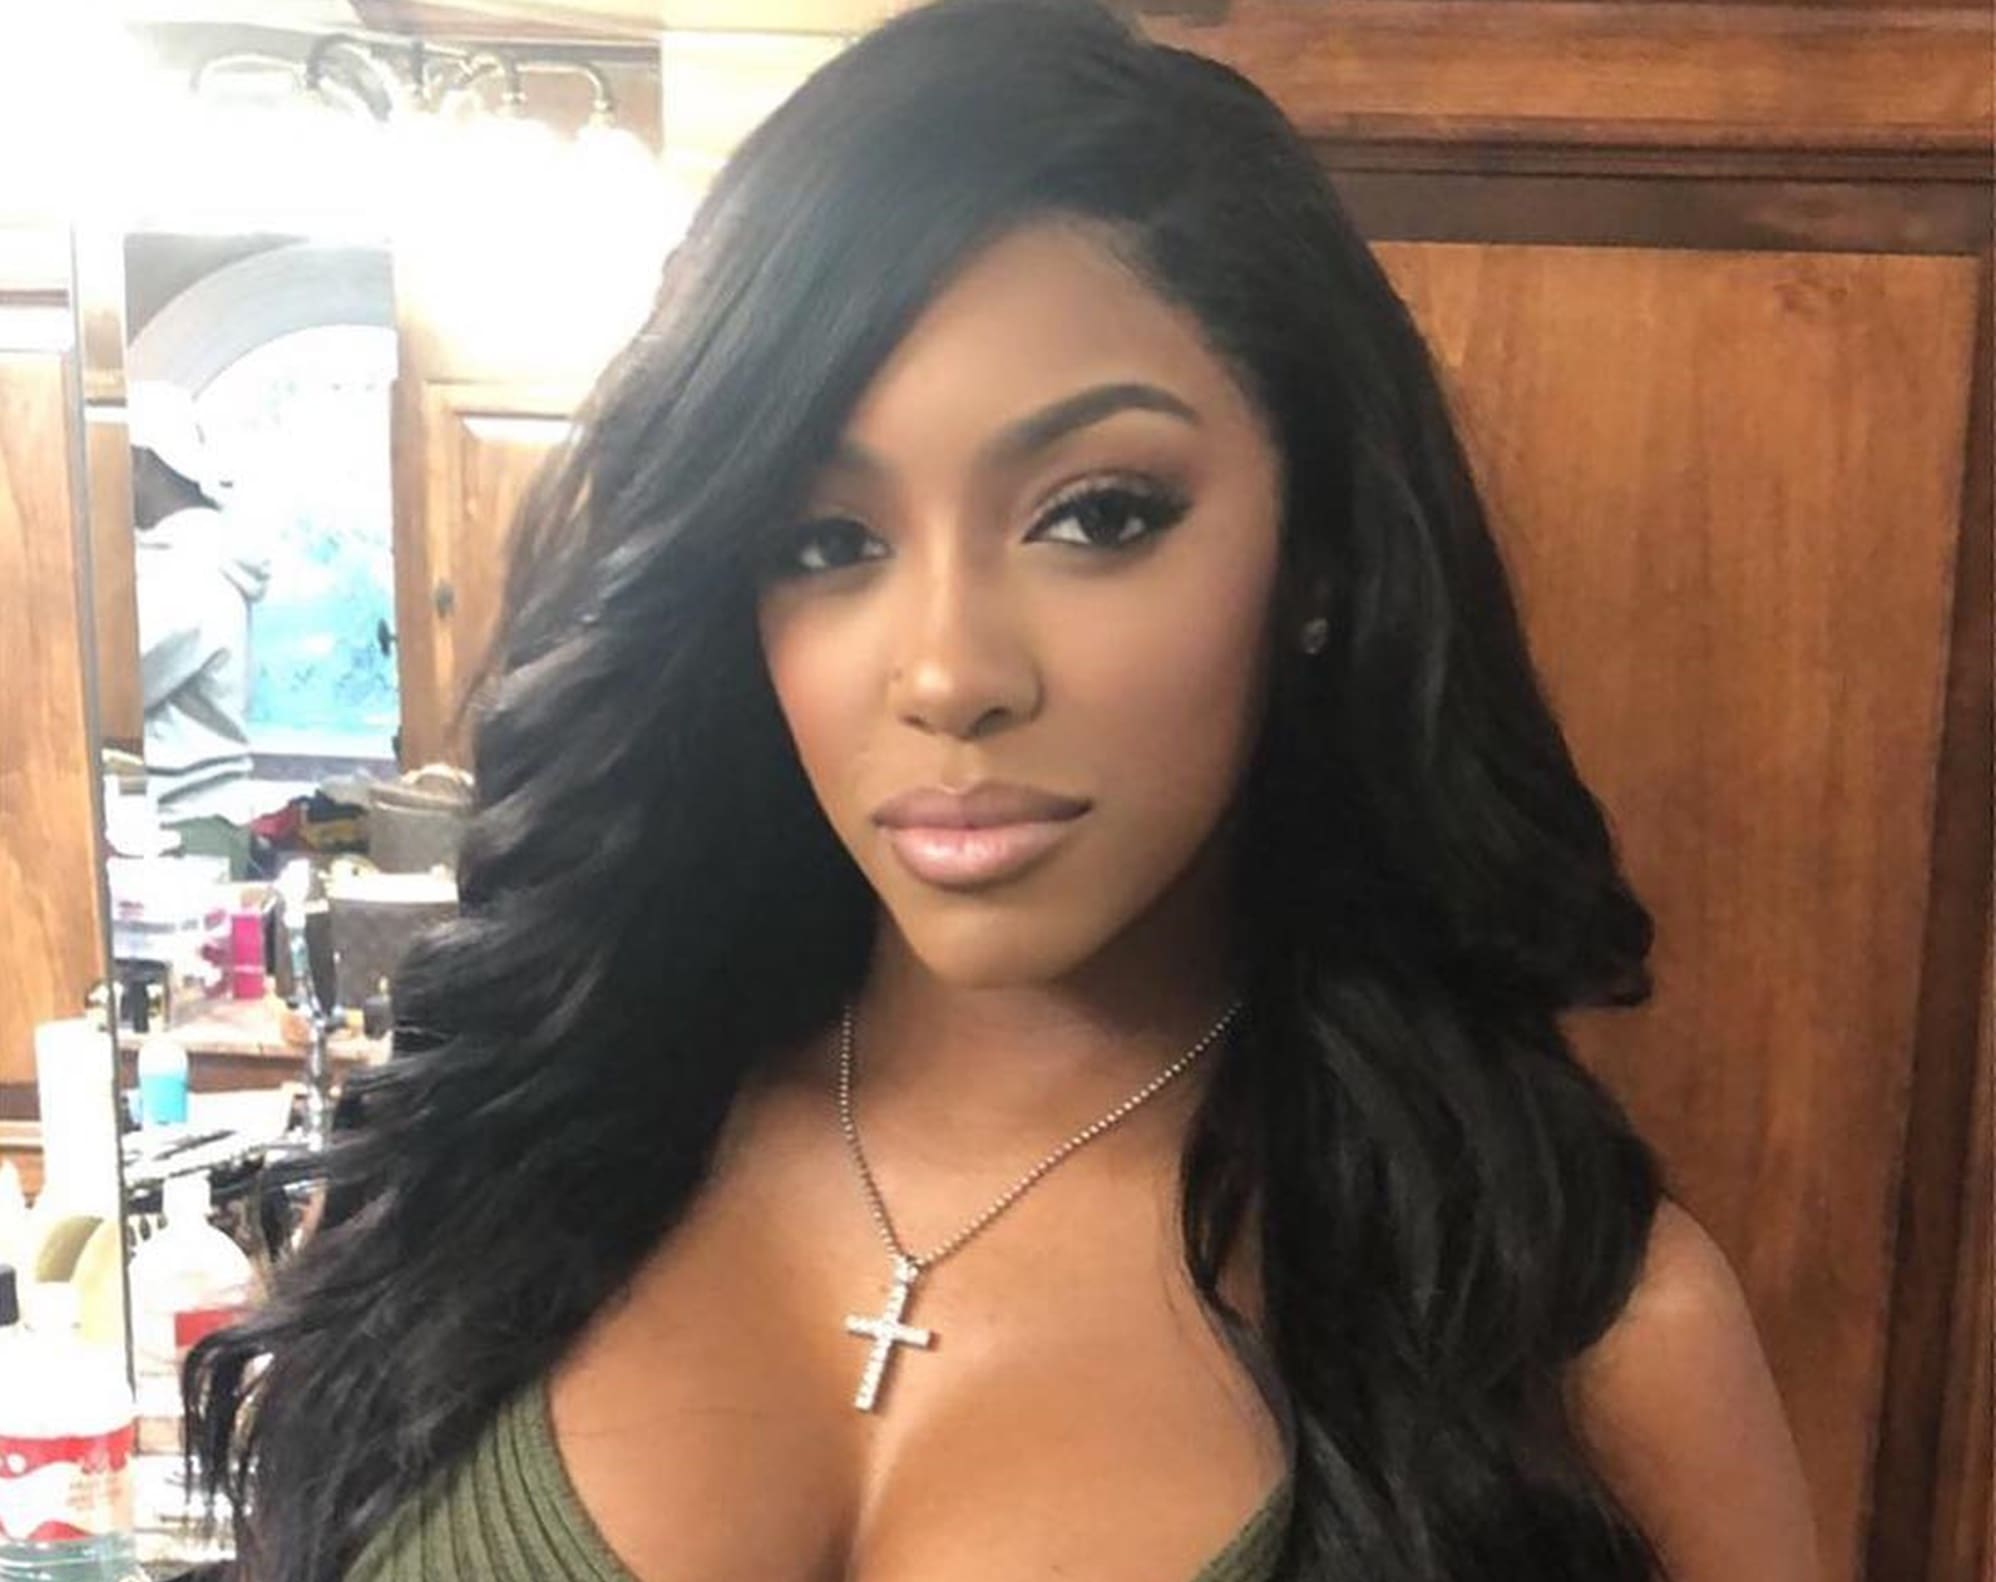 Porsha Williams Is Simply Shining In The Perfect Vacay Dress - Check Out Her Gorgeous Pics